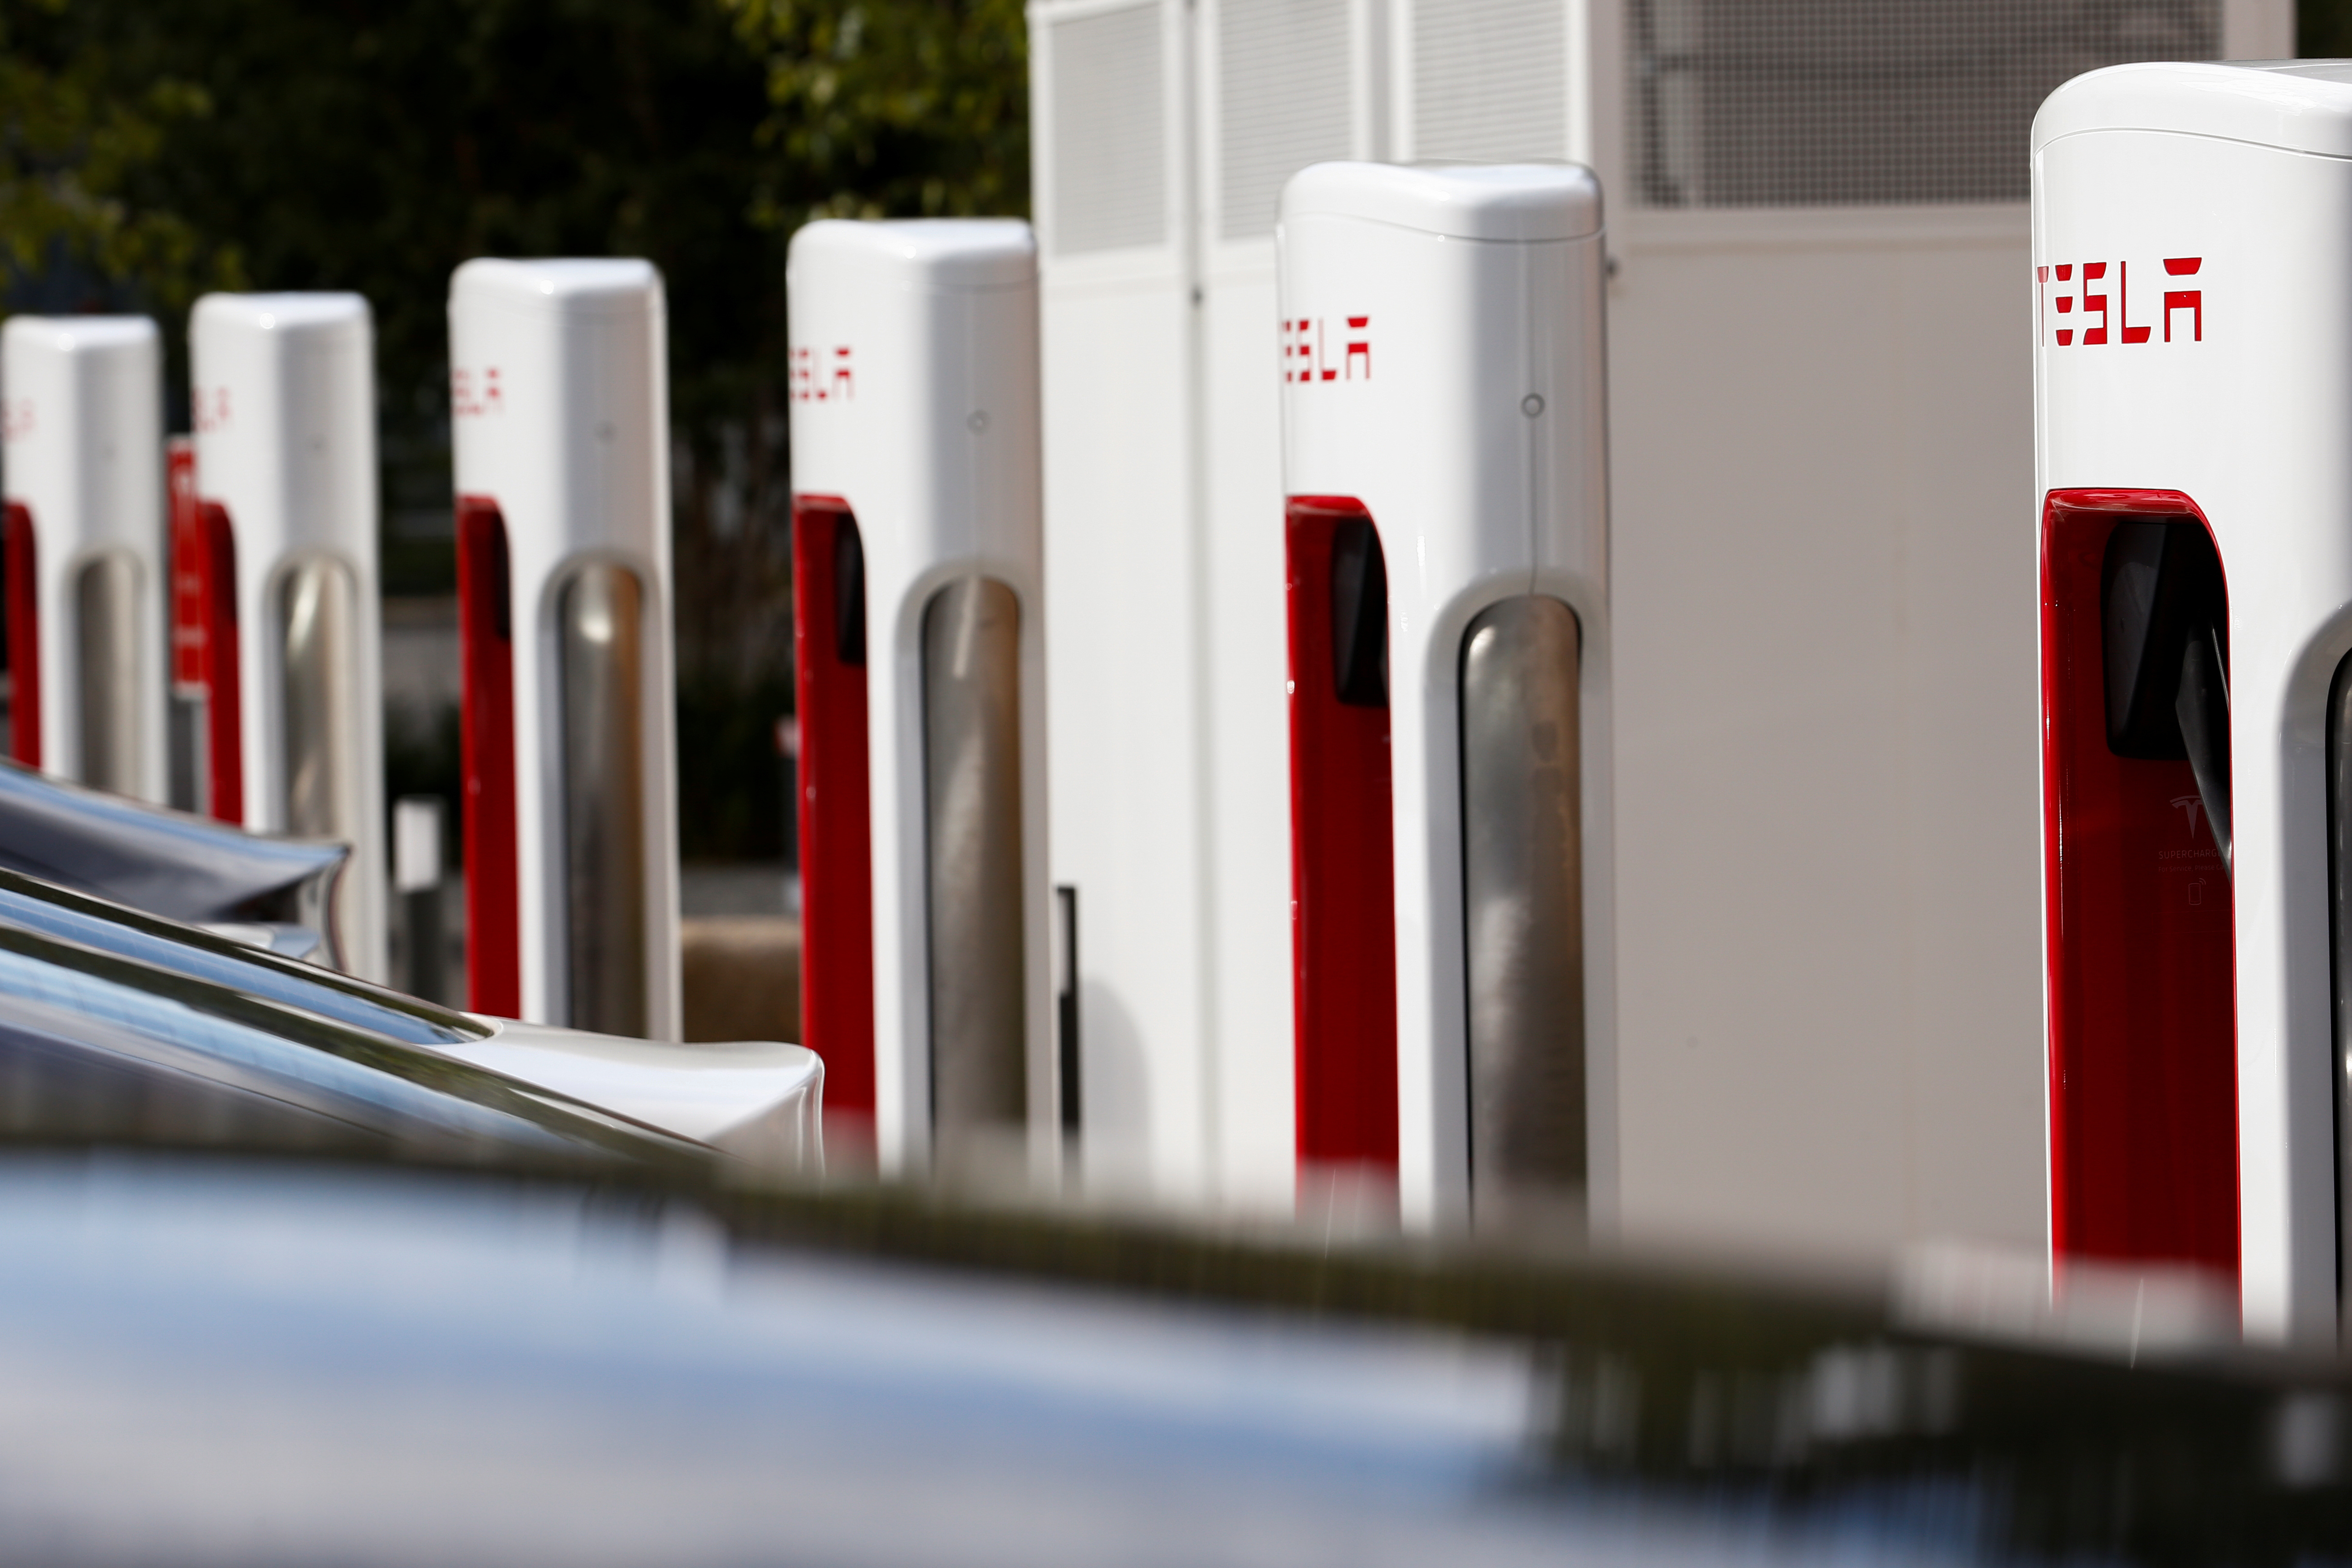 Tesla managers demonstrate V3 superchargers on German research campus in Berlin